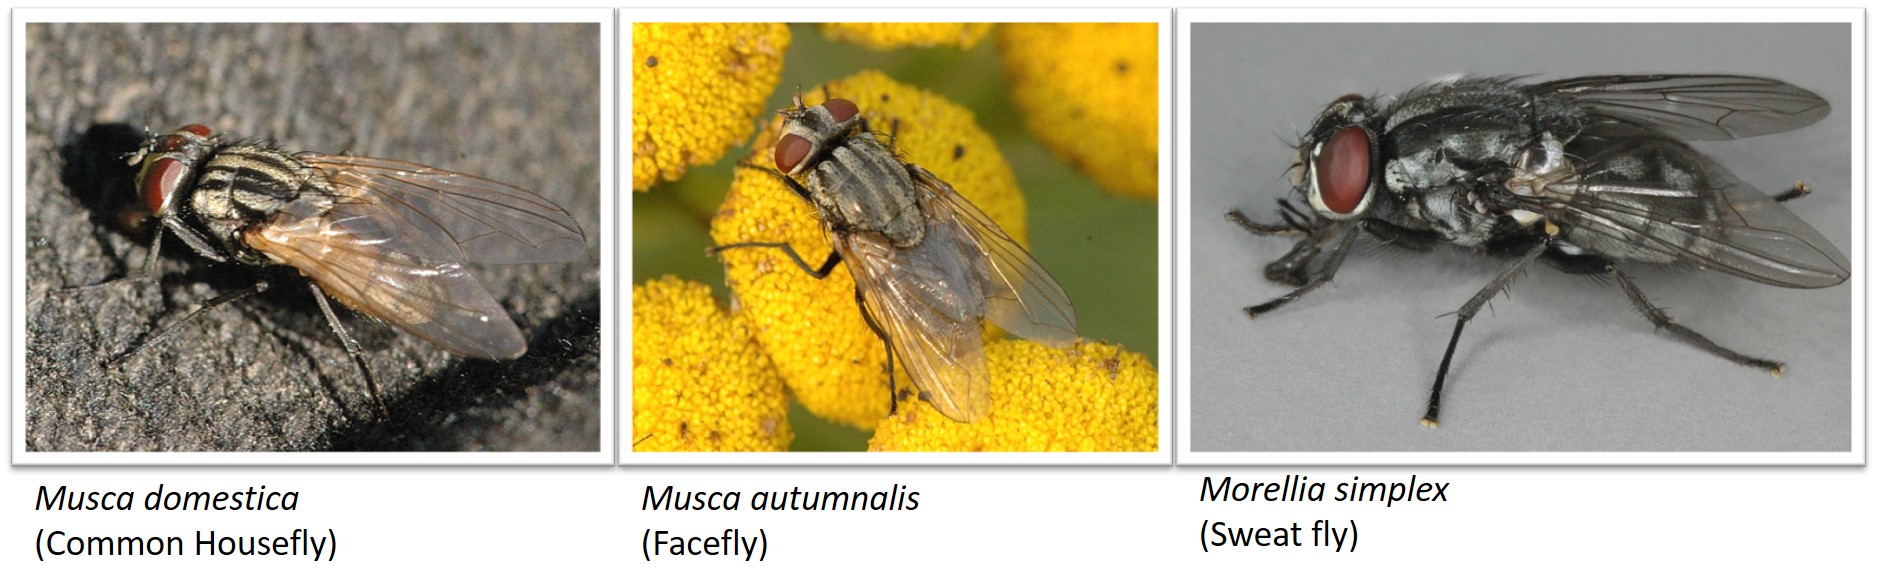 musca domestica comparison with other species..jpg